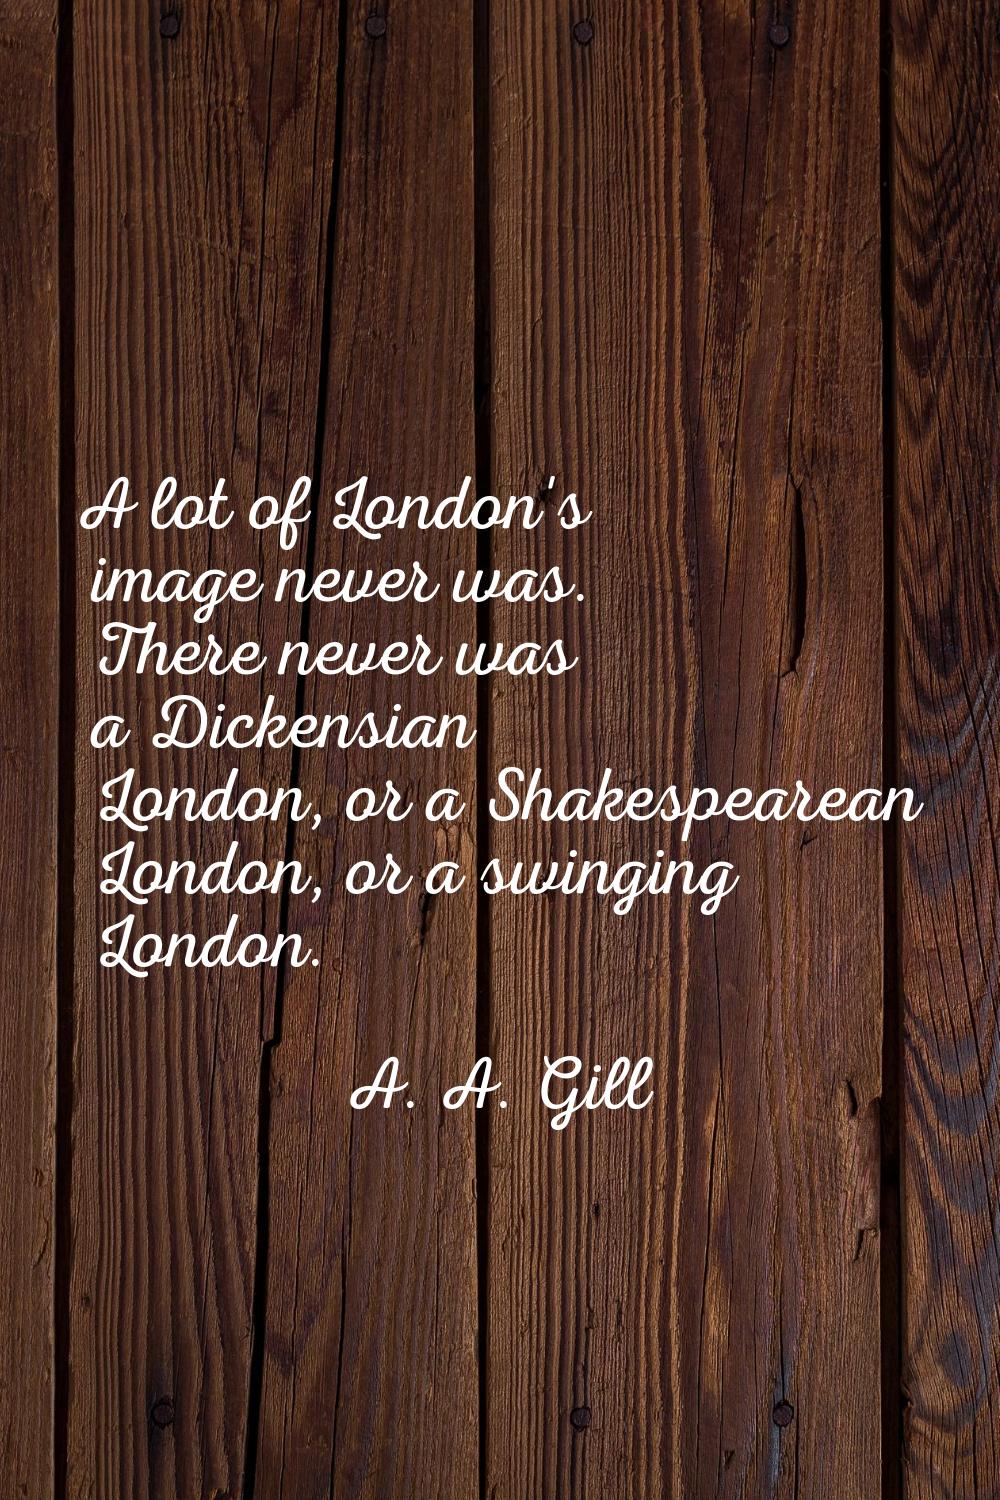 A lot of London's image never was. There never was a Dickensian London, or a Shakespearean London, 